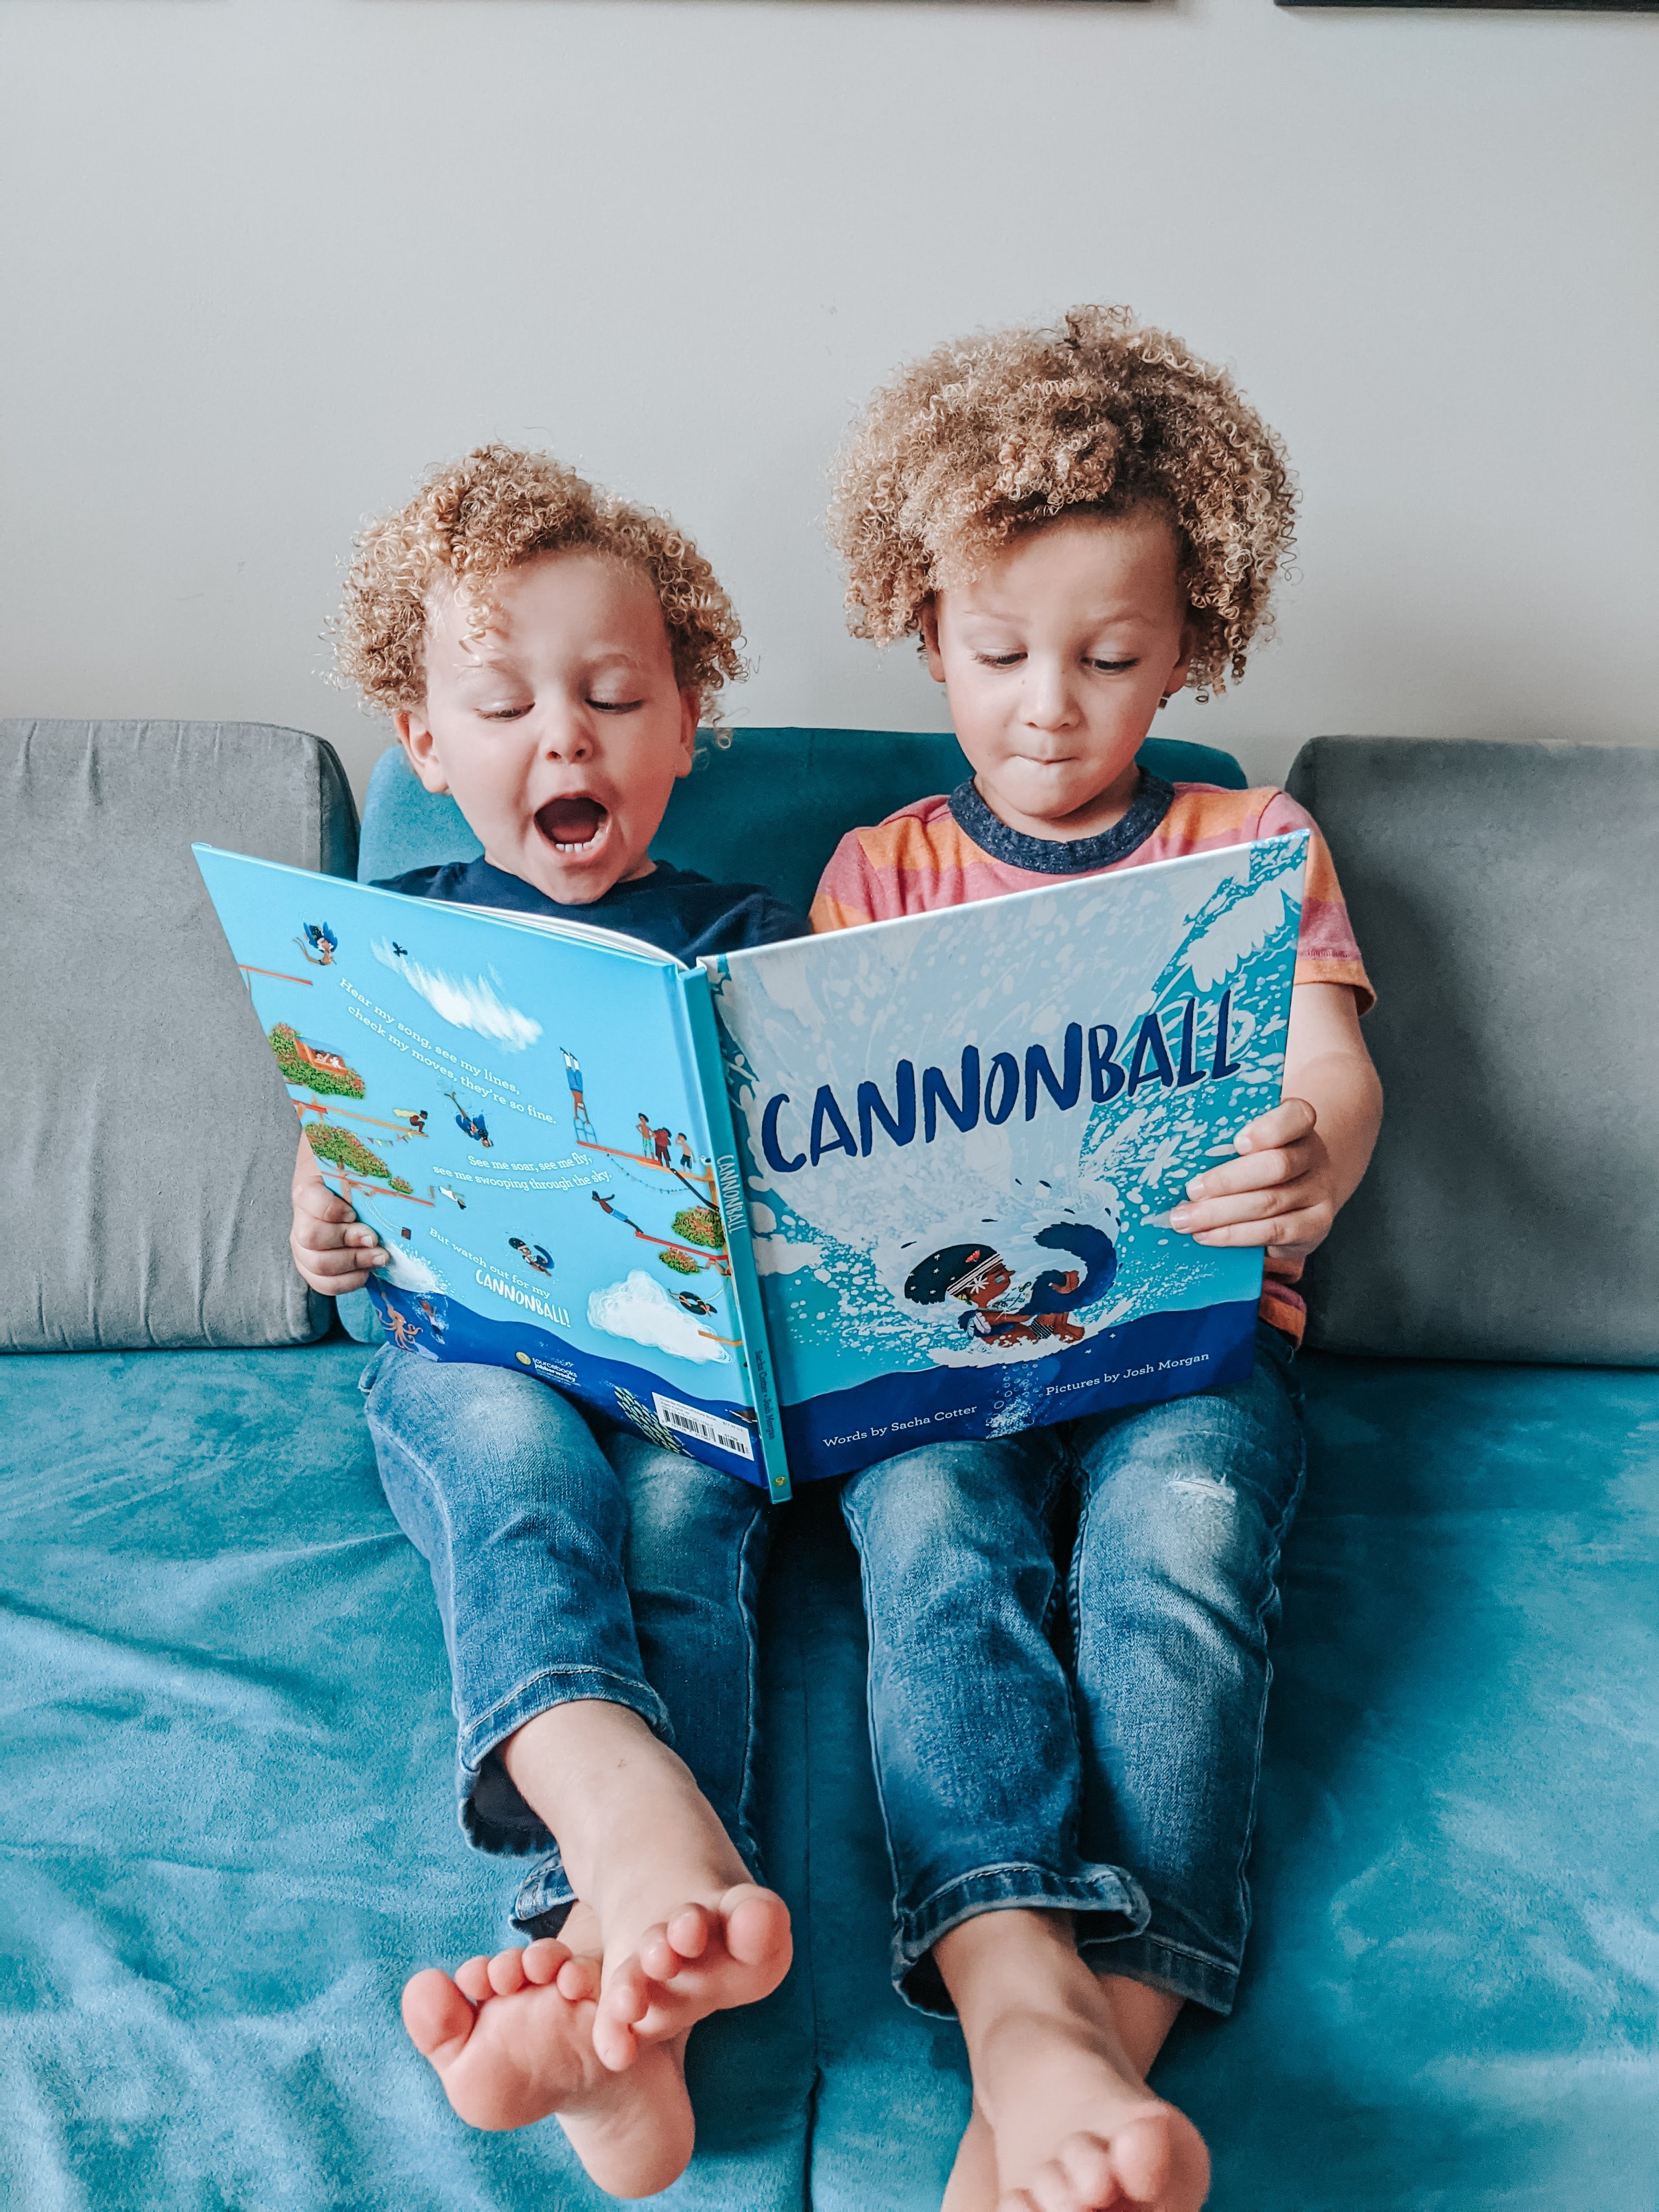 Two kids holding "Cannonball" on their laps, legs extended with ankles crossed, with Little Curly's mouth open like he's shouting "Cannonball!"